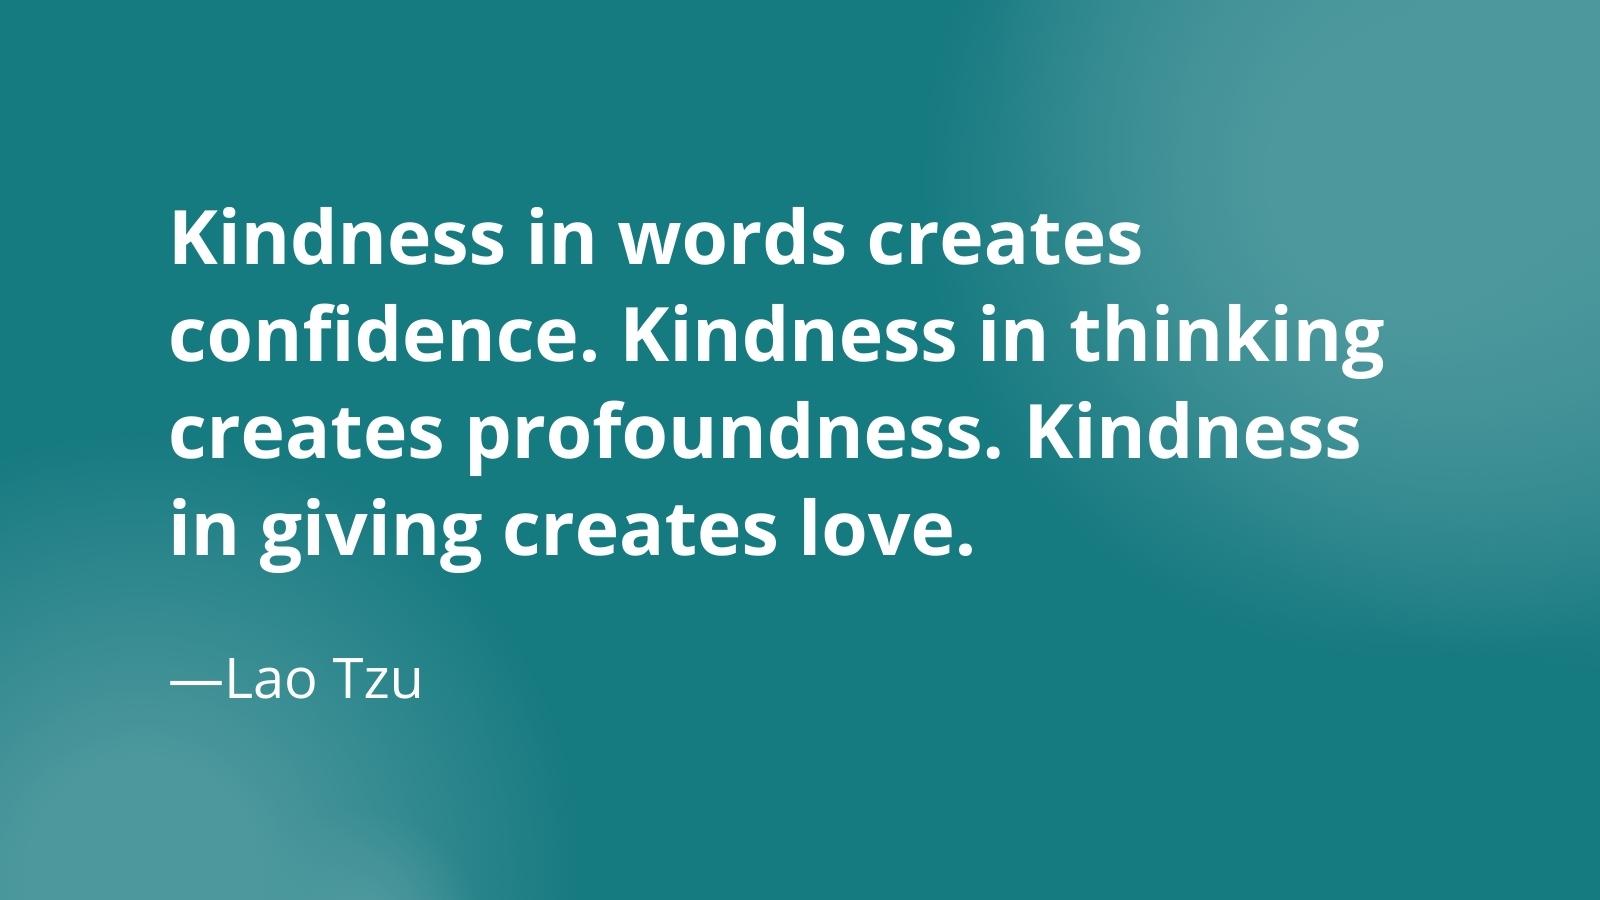 Quote: Kindness in words creates confidence. Kindness in thinking creates profoundness. Kindness in giving creates love. —Lao Tzu